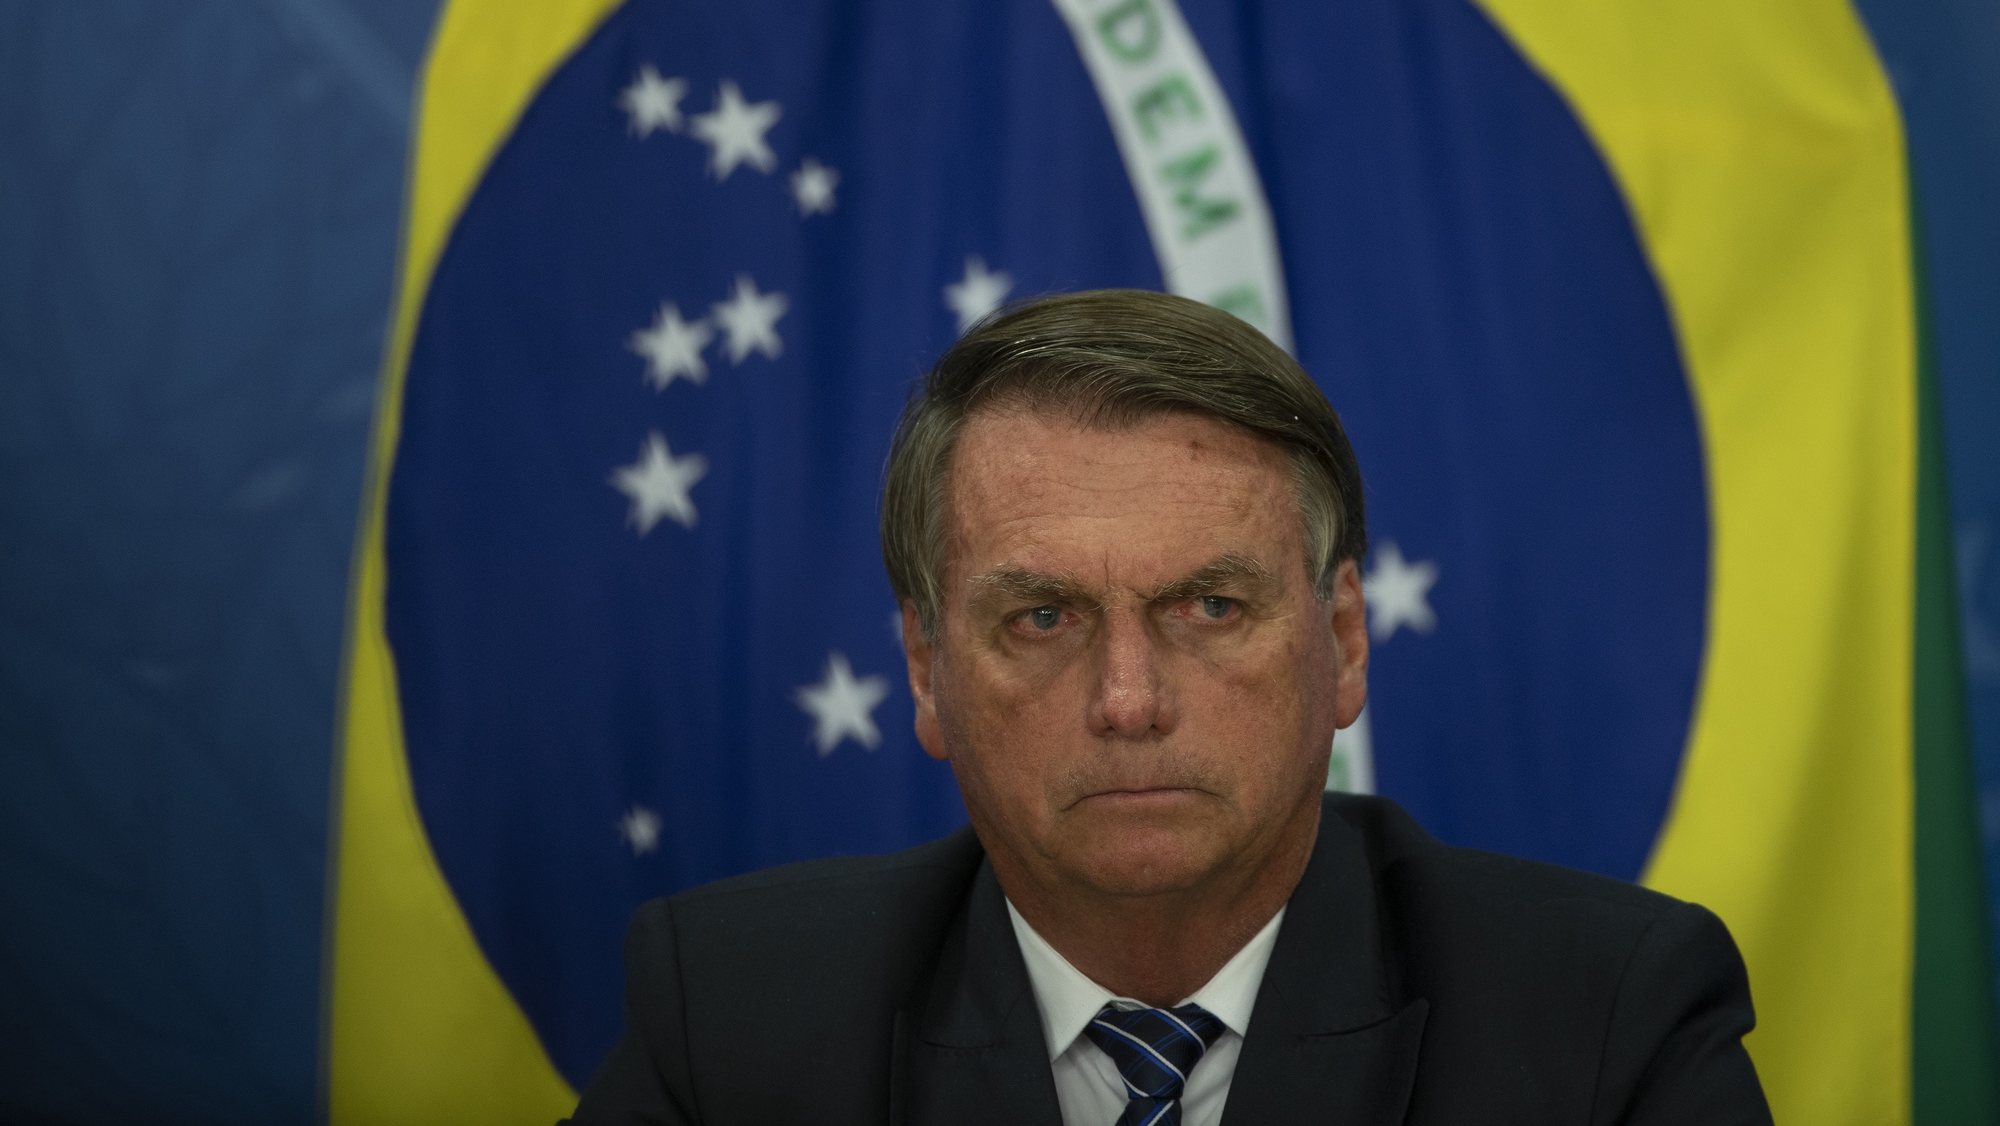 epa09999781 The President of Brazil, Jair Bolsonaro, takes part during a press conference on his policies to control fuel prices, at the Planalto Palace in Brasilia, Brazil, 06 June 2022. Bolsonaro announced that the Federal Government will reimburse the states for the loss of income that would derive from the bill that establishes a maximum rate for the tax on fuels. The President also announced that his Government will demand in return that the states reduce the ICMS tax rate on diesel to zero.  EPA/Joedson Alves